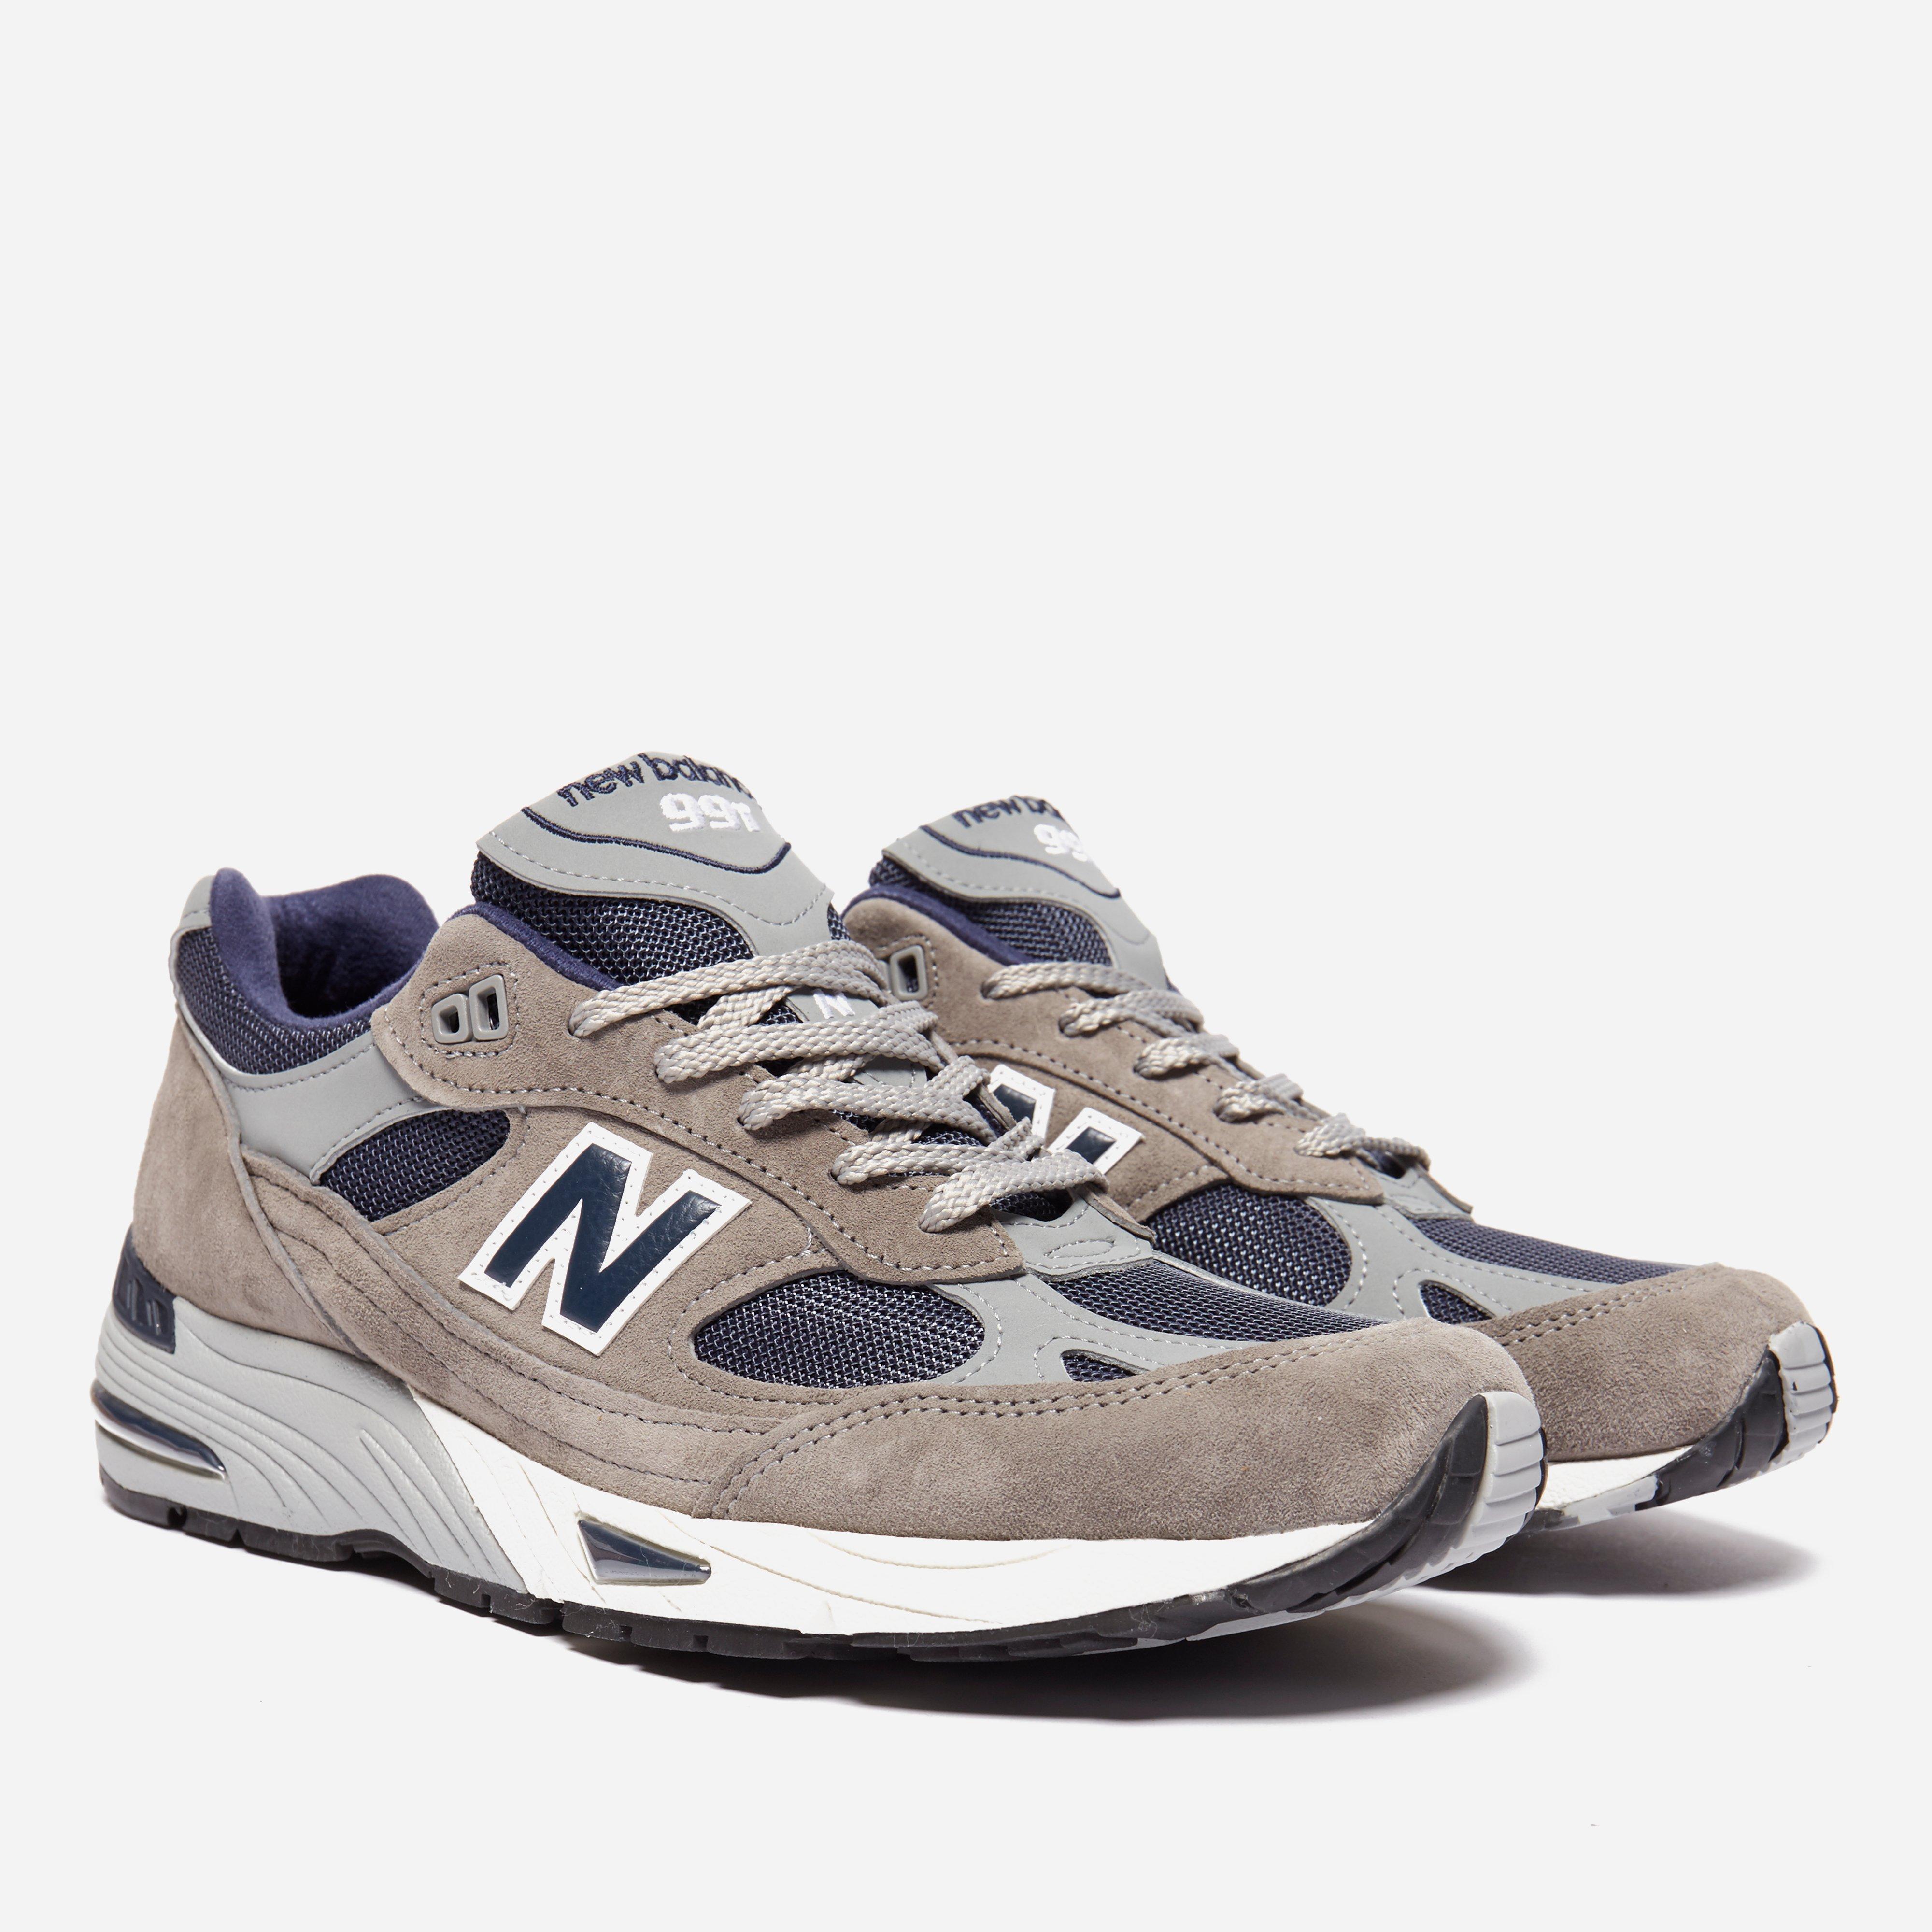 new balance 991 grey speckled for sale